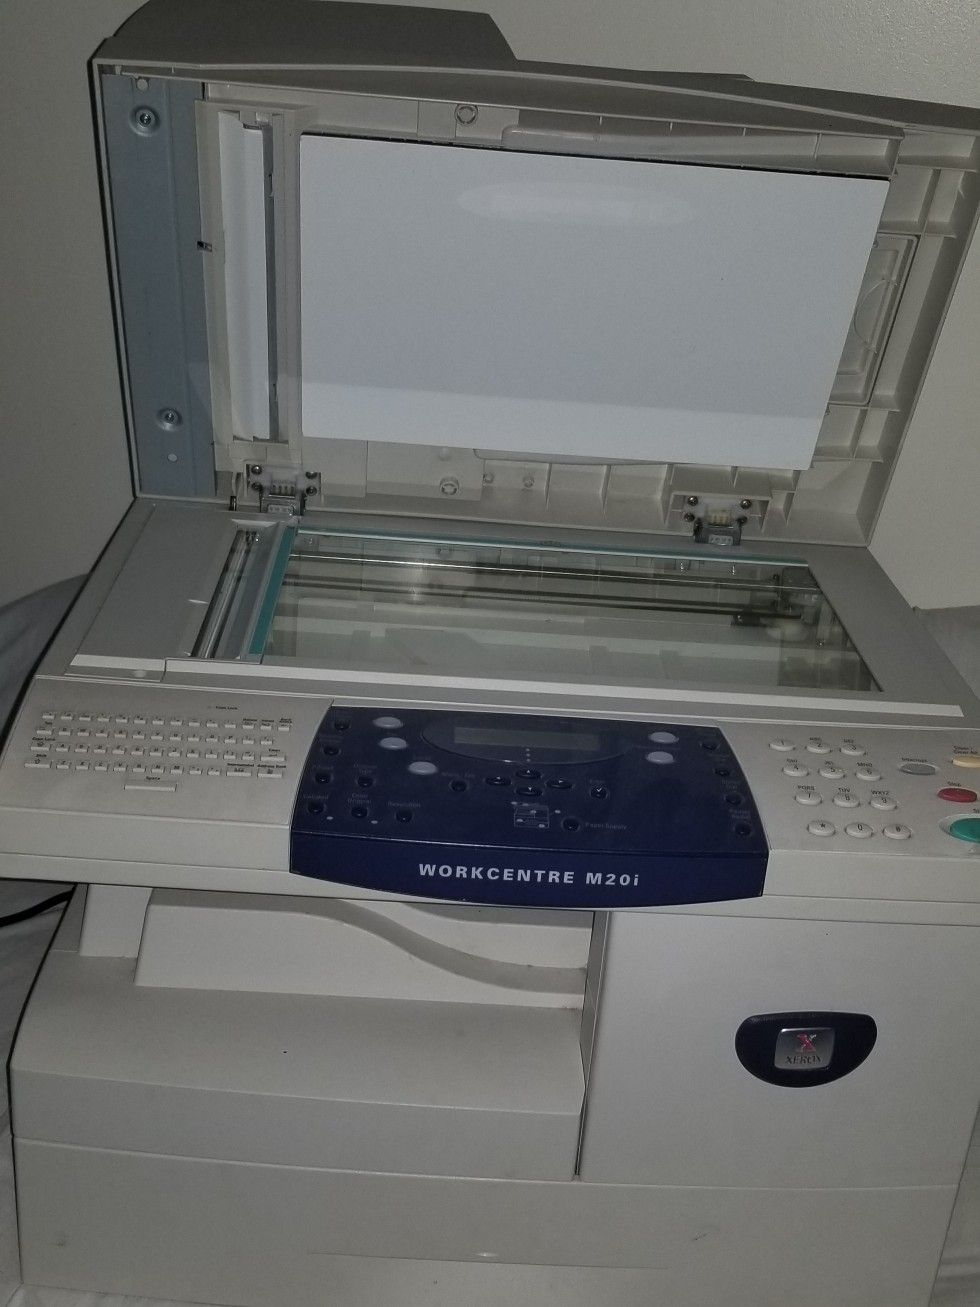 Xerox printer, fax, email and more